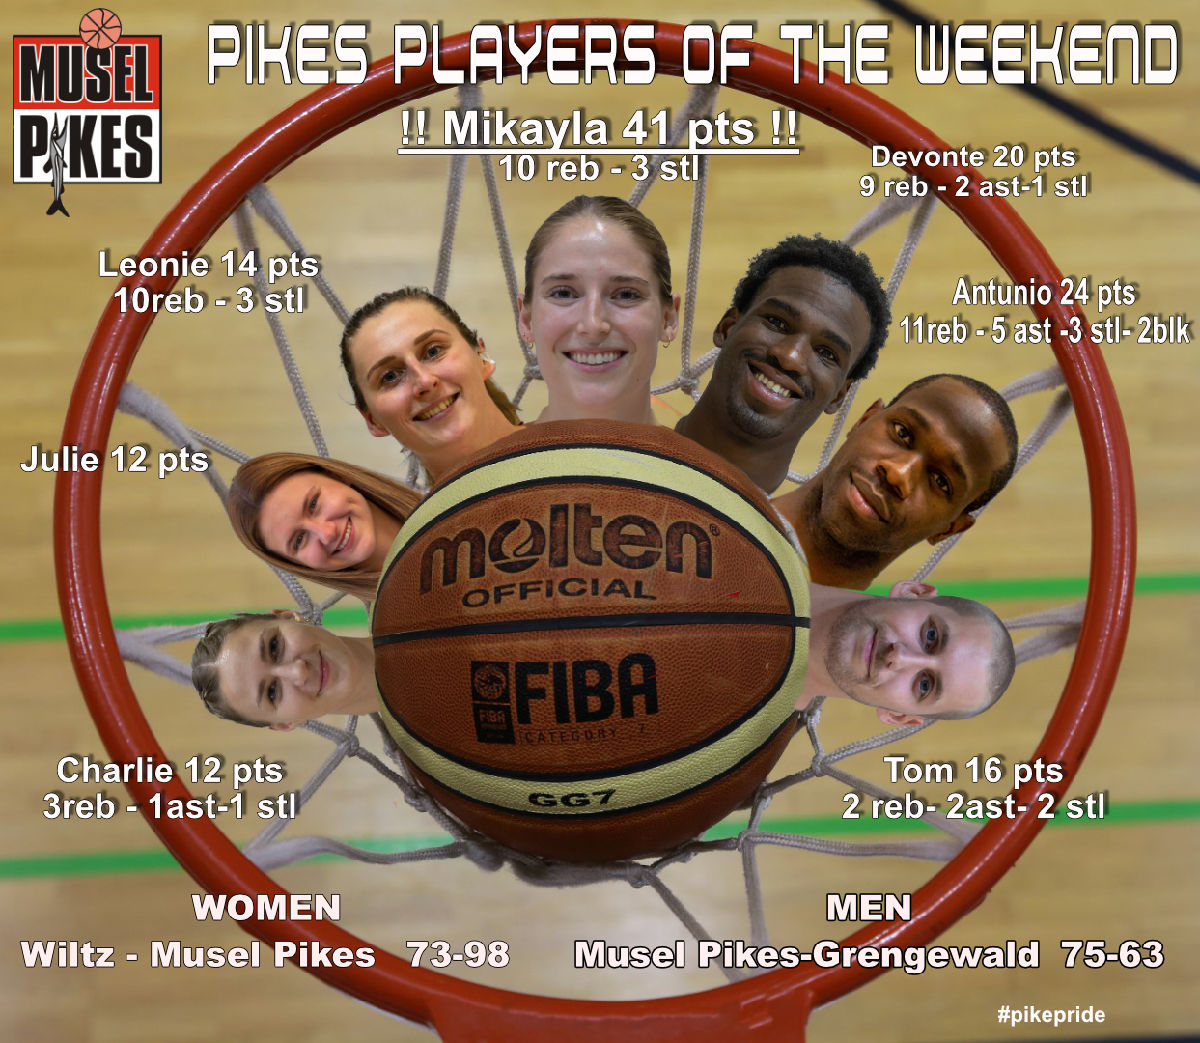 PPW (PIKES PLAYERS OF THE WEEKEND)